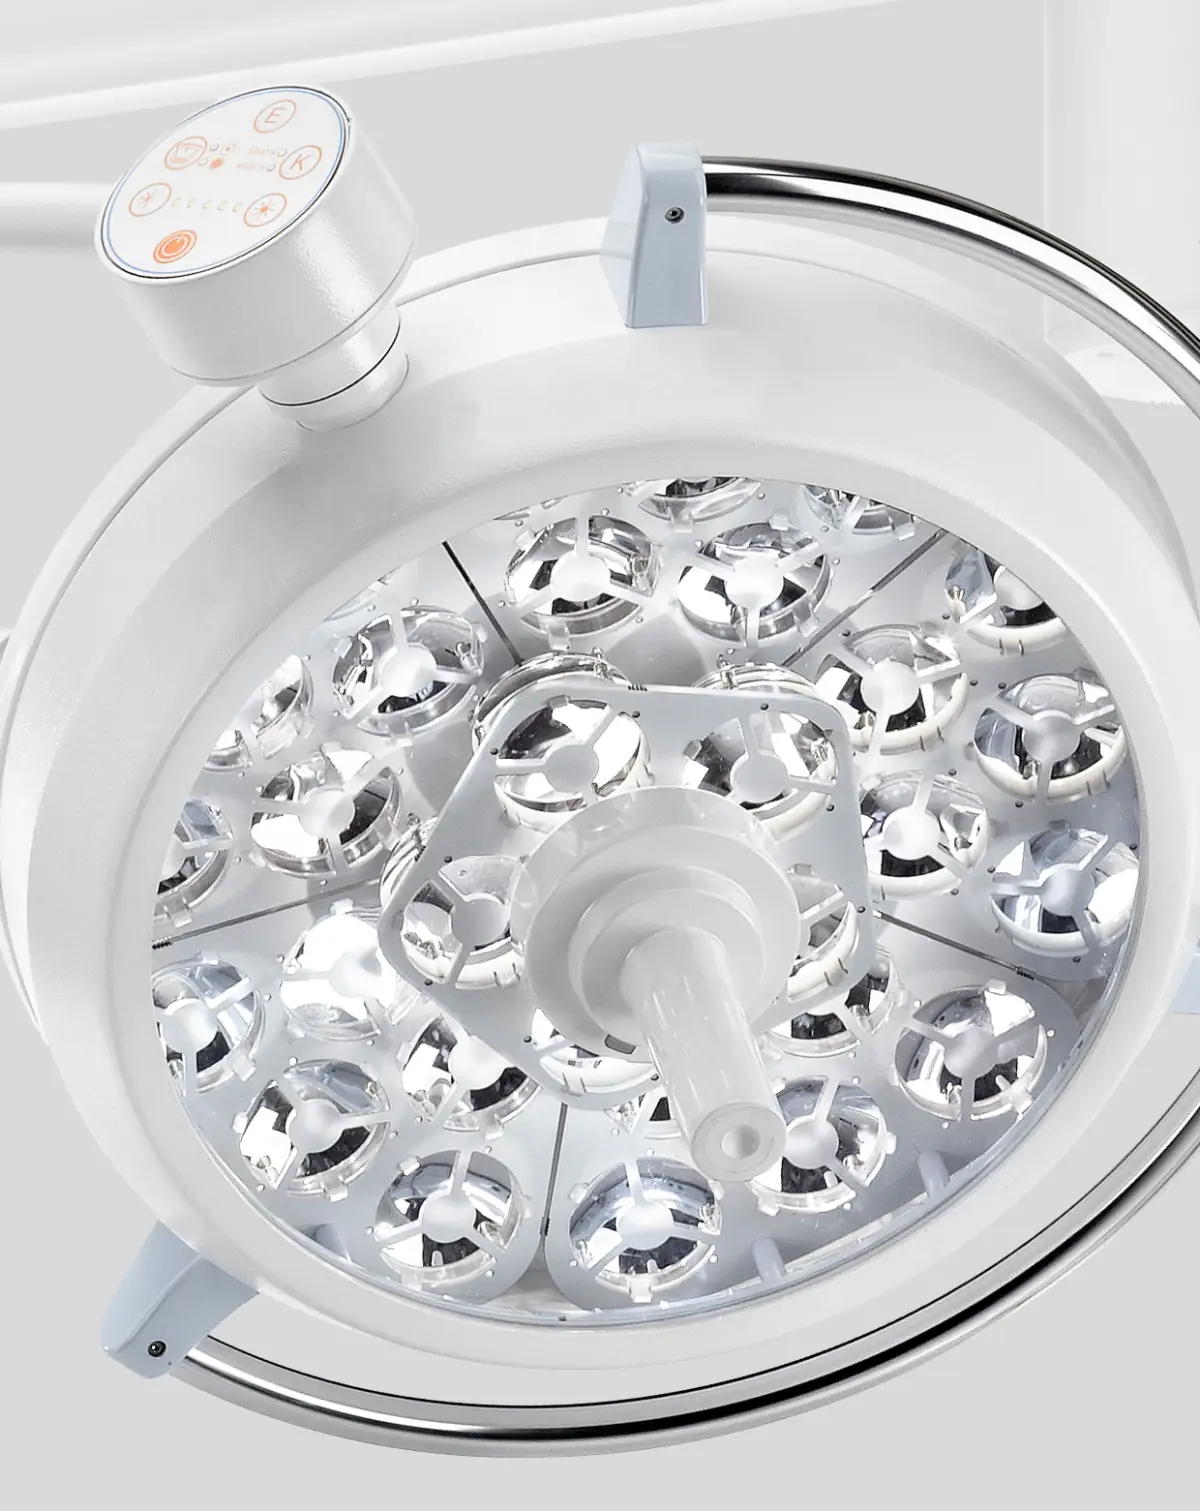 Pentaled 30 E is a scialytic led lamp for small surgery.